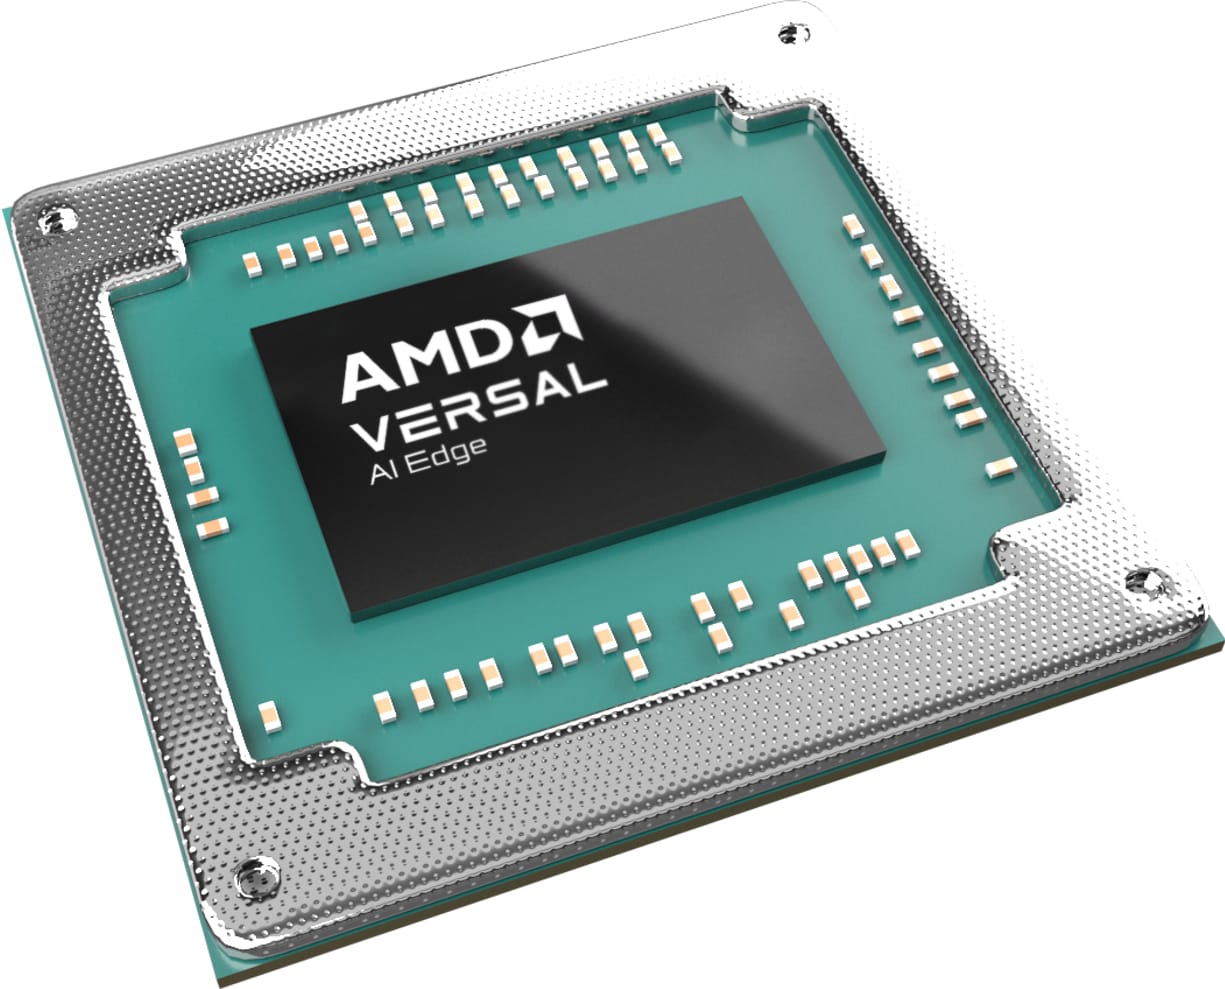 AMD is expanding its portfolio with the next-generation Versal Series devices